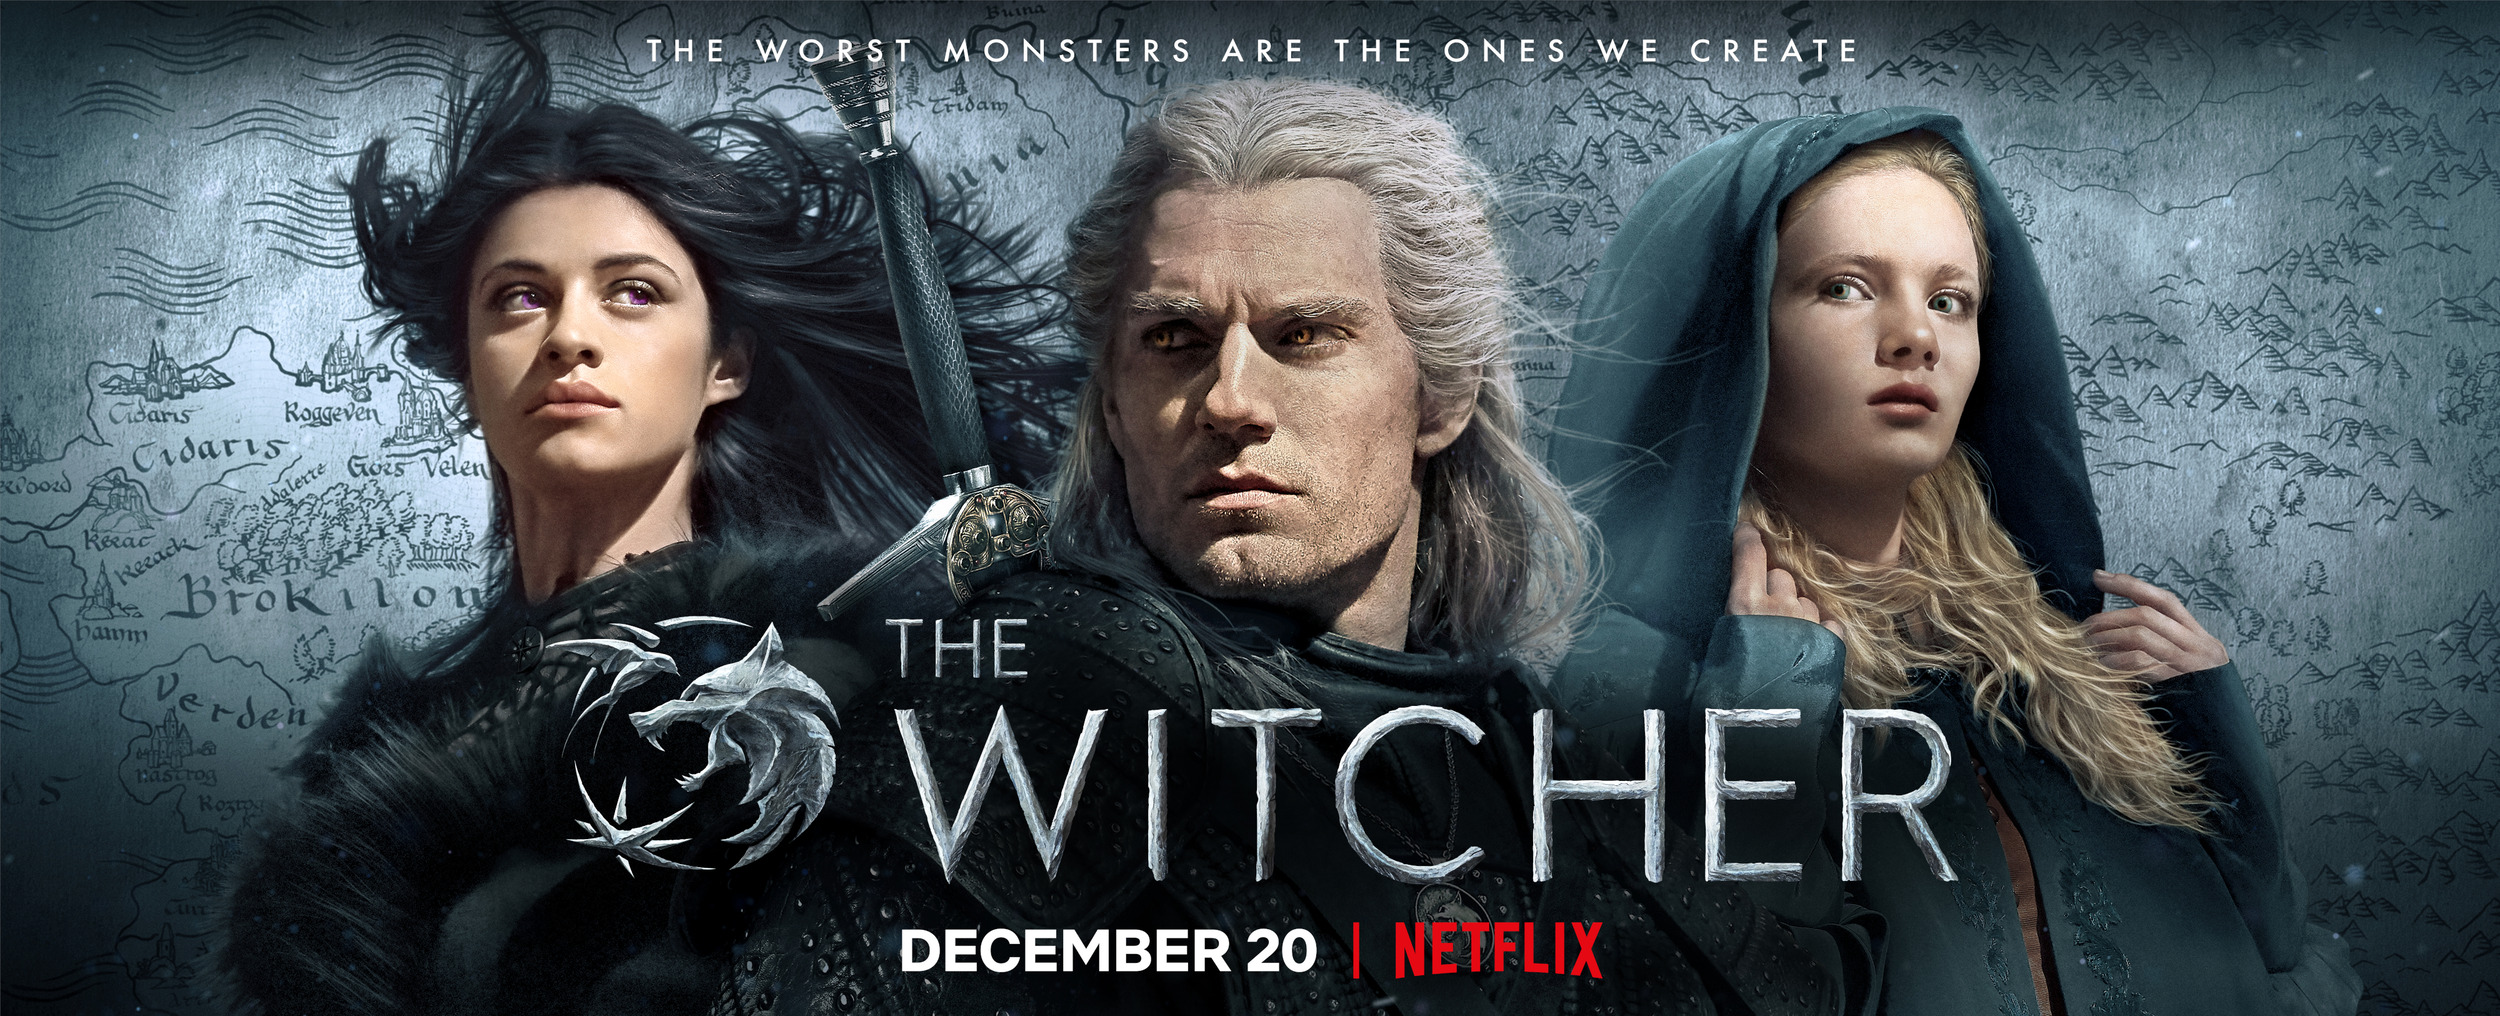 Mega Sized TV Poster Image for The Witcher (#6 of 22)